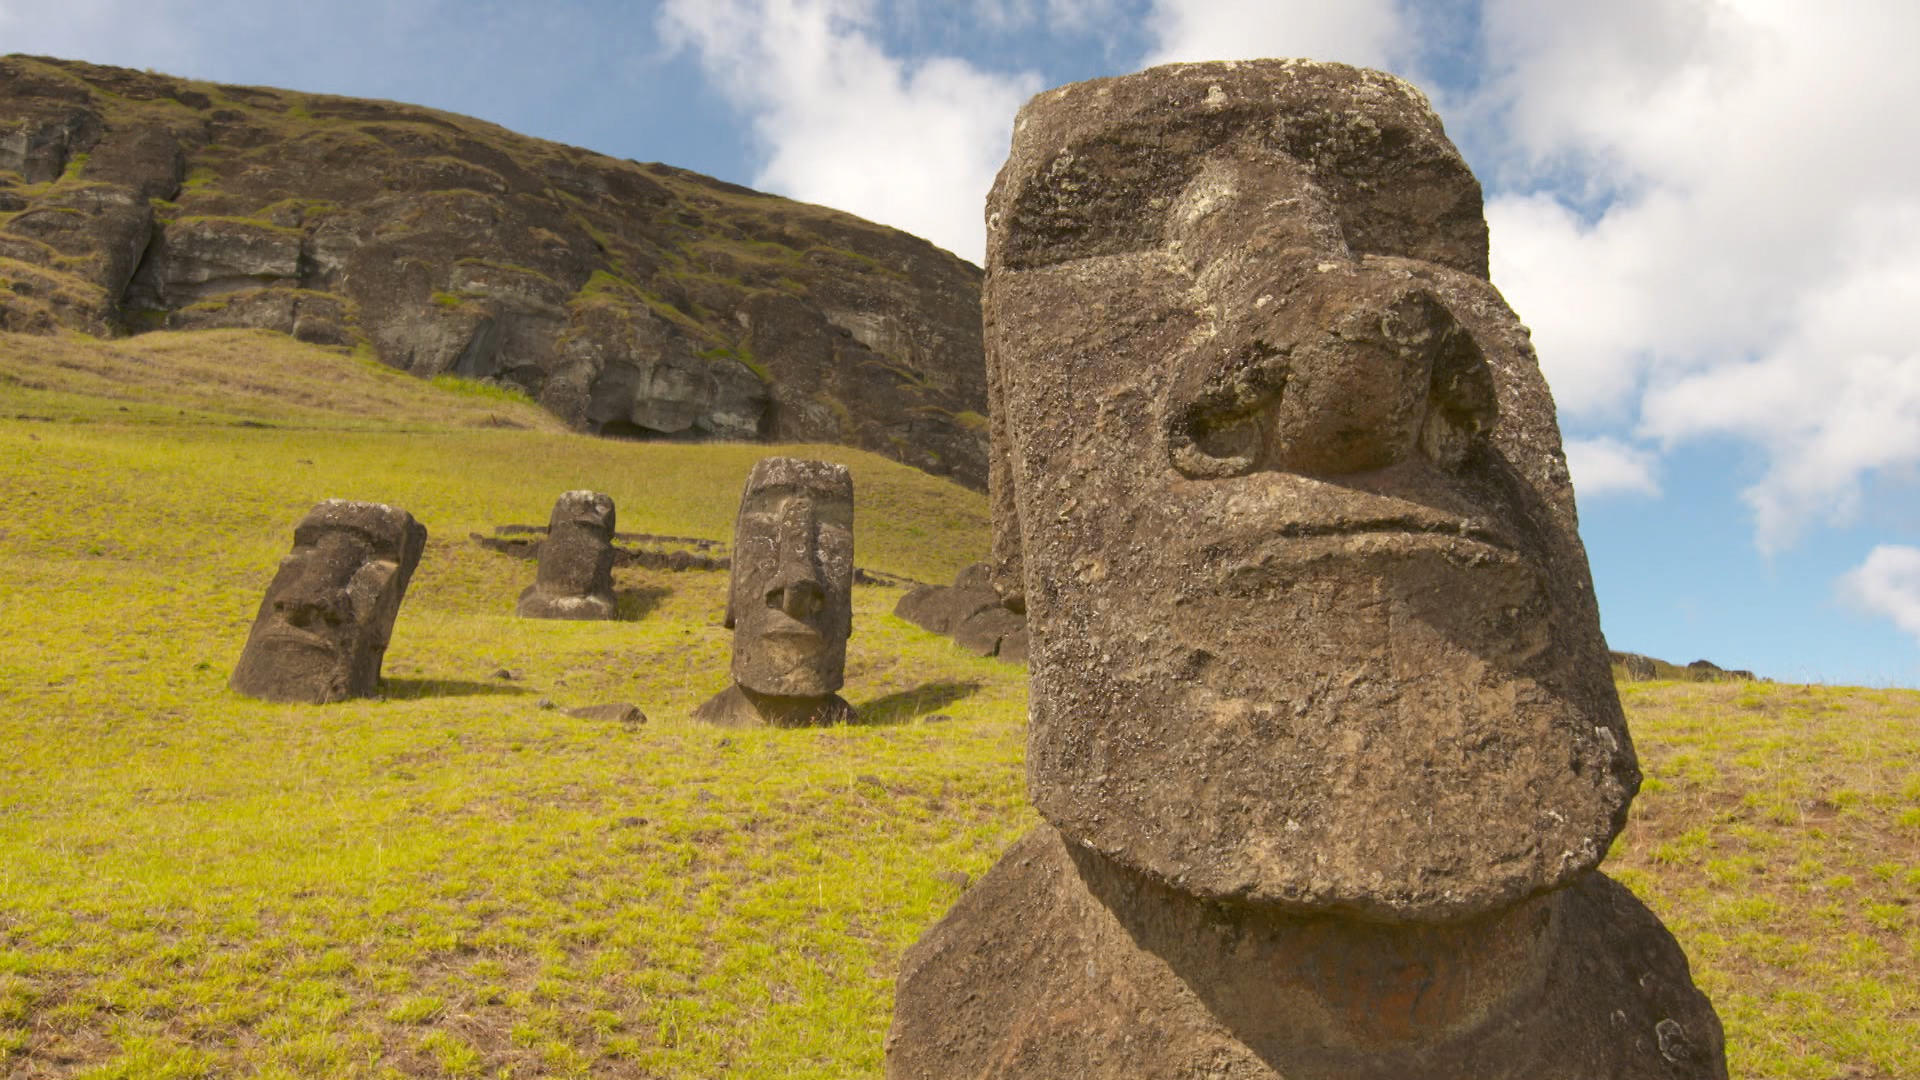 Fading moai, Cultural heritage, Iconic statues, CBS news feature, 1920x1080 Full HD Desktop